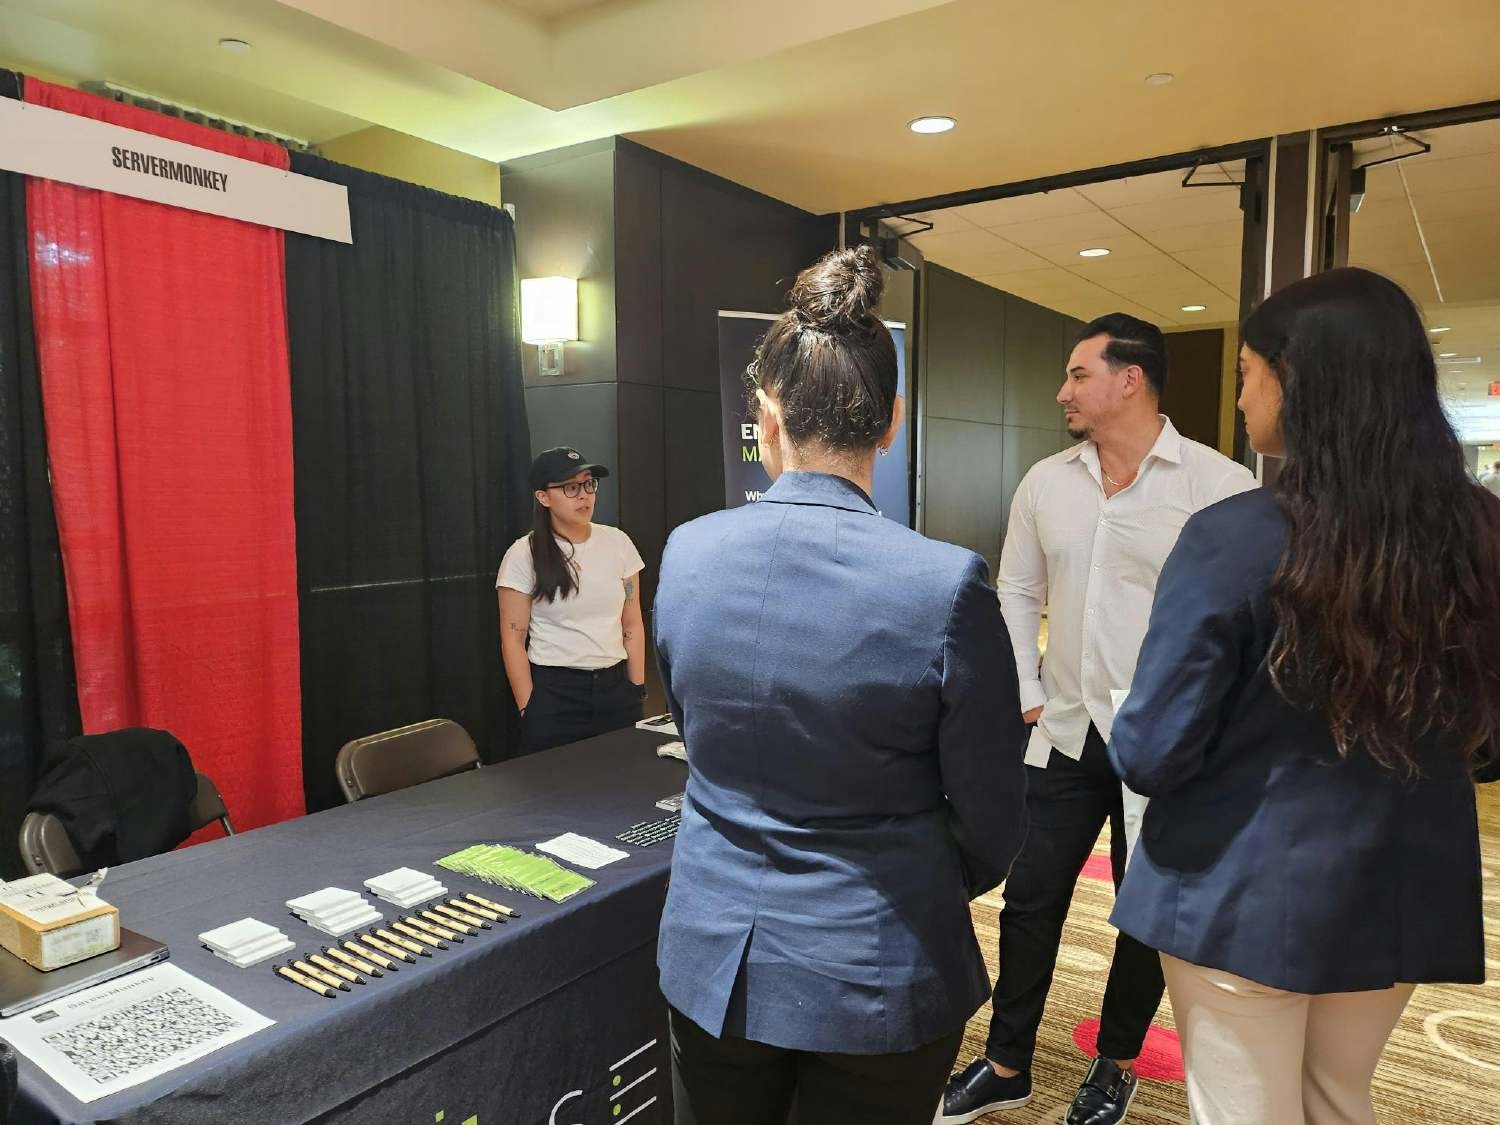 This is our Vice President and Director at the University of Houston's Bauer Business Career Fair.